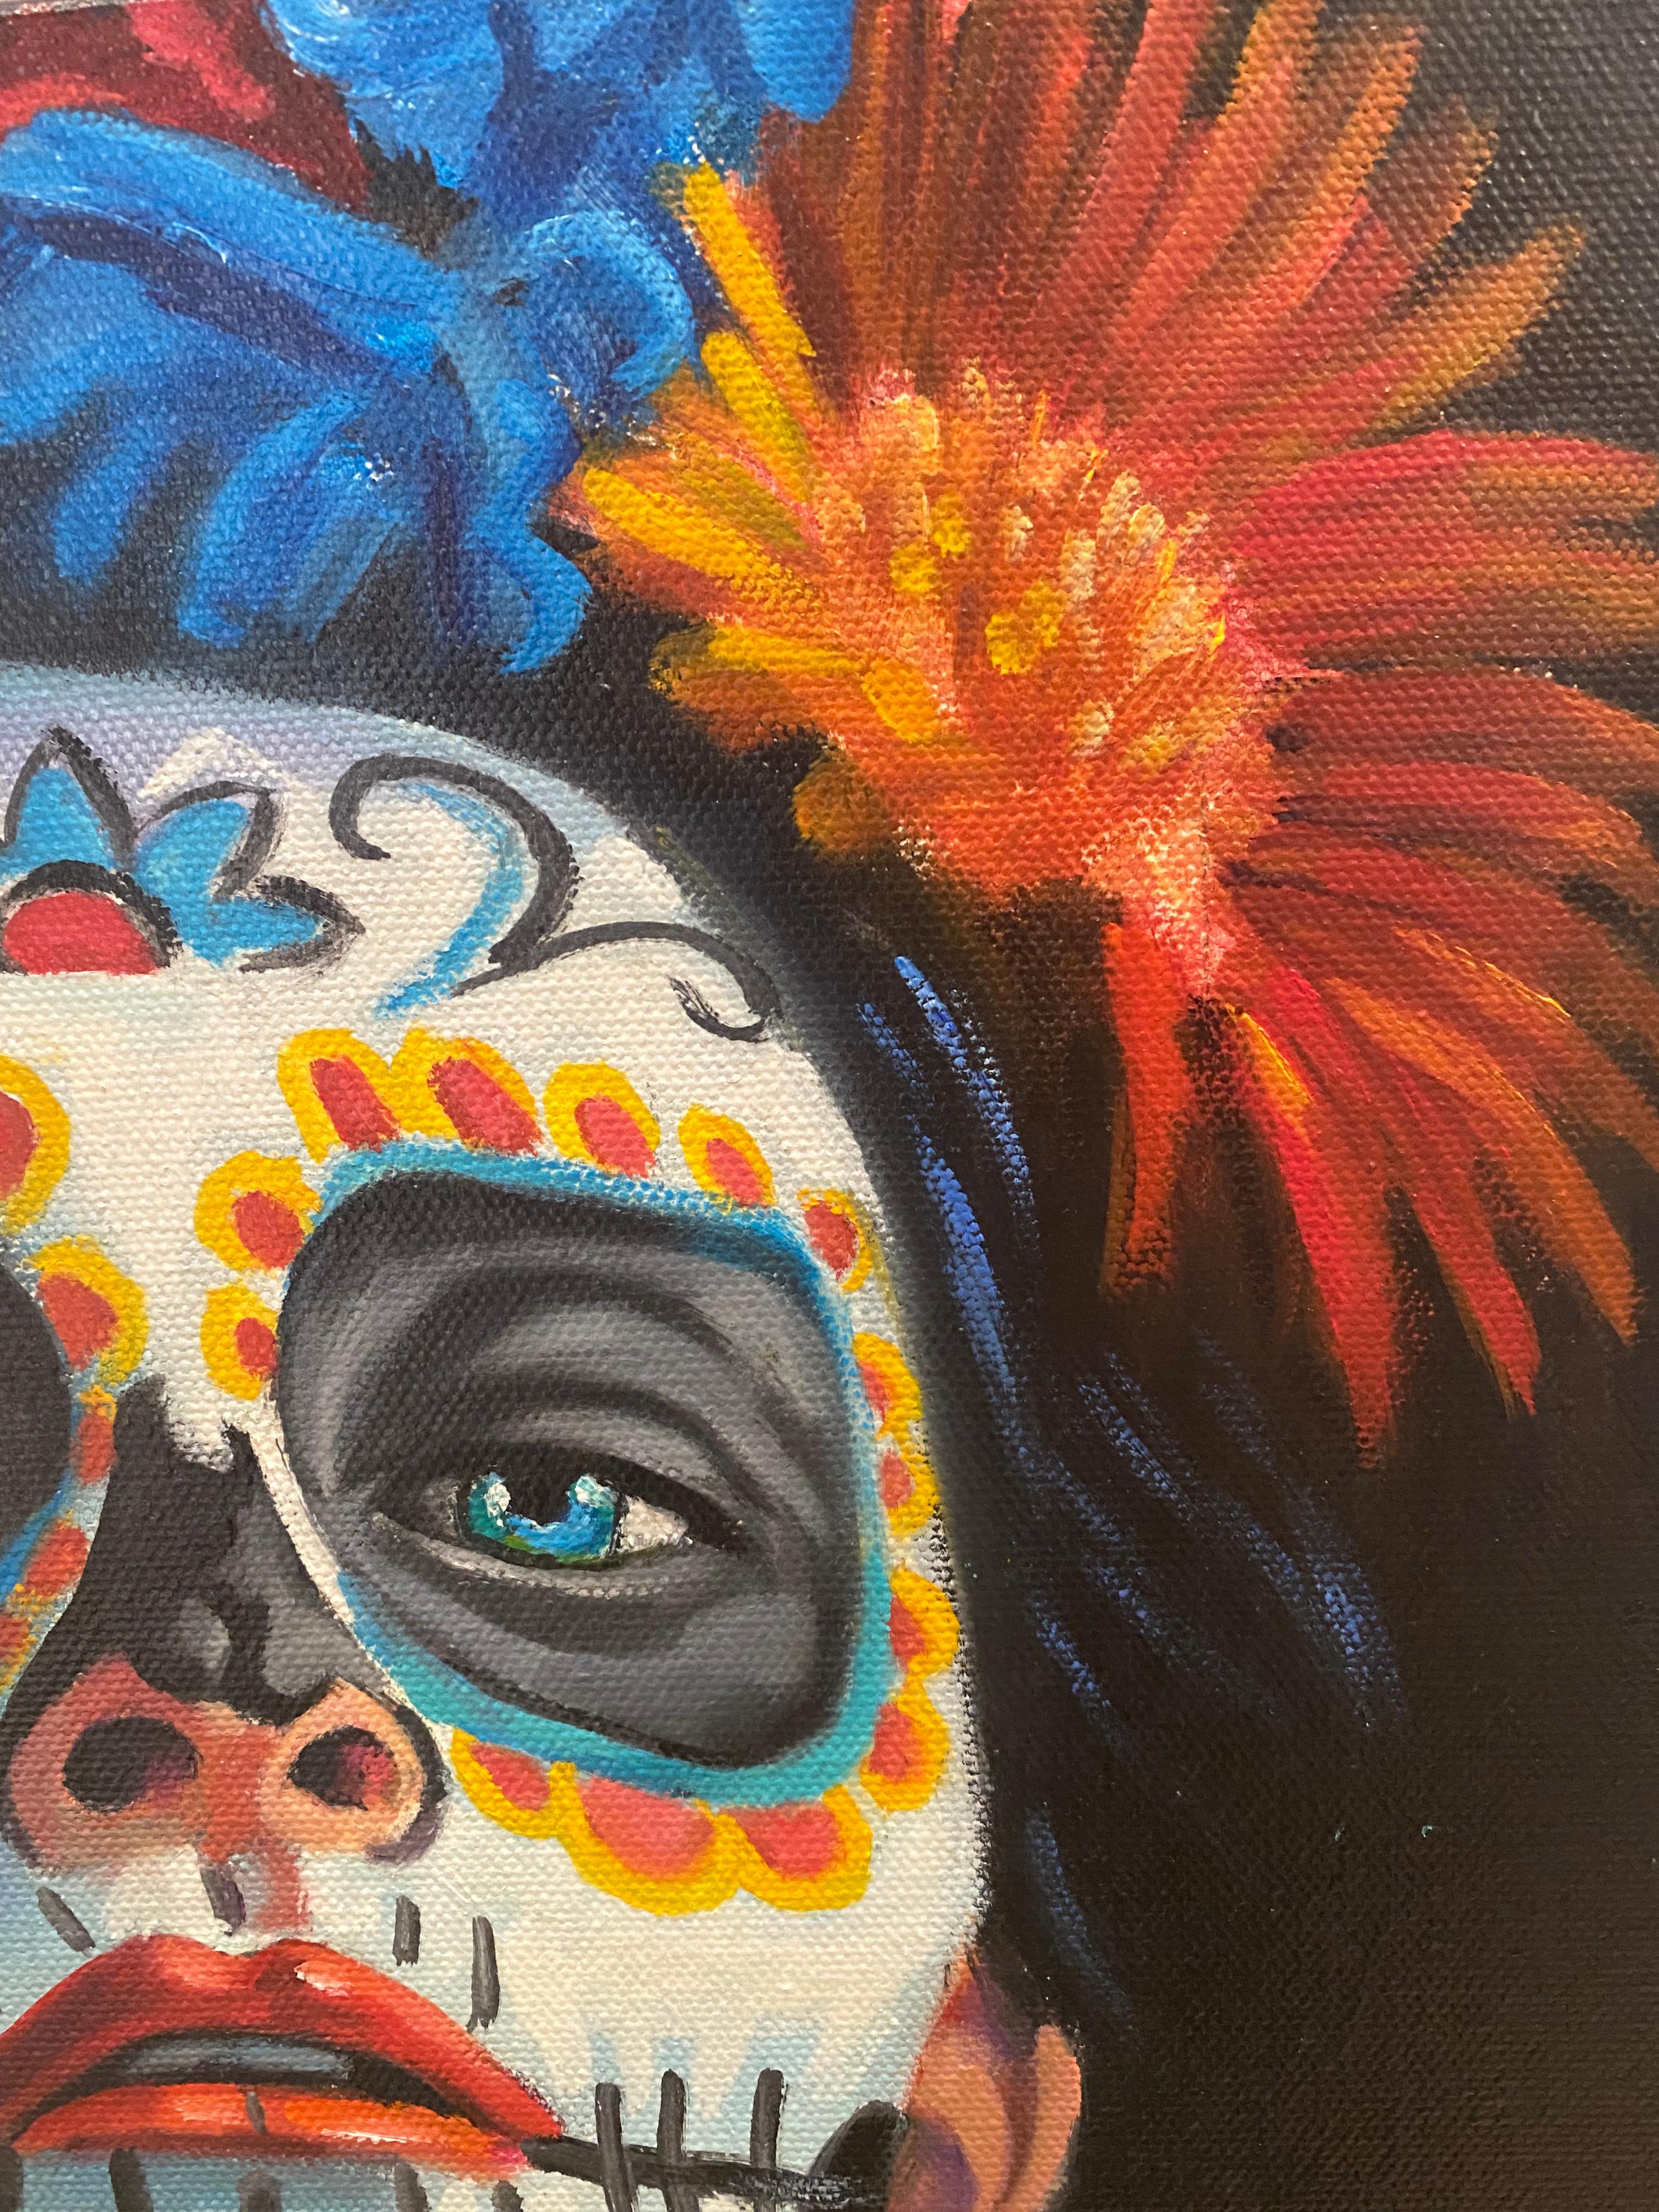 day of dead painting